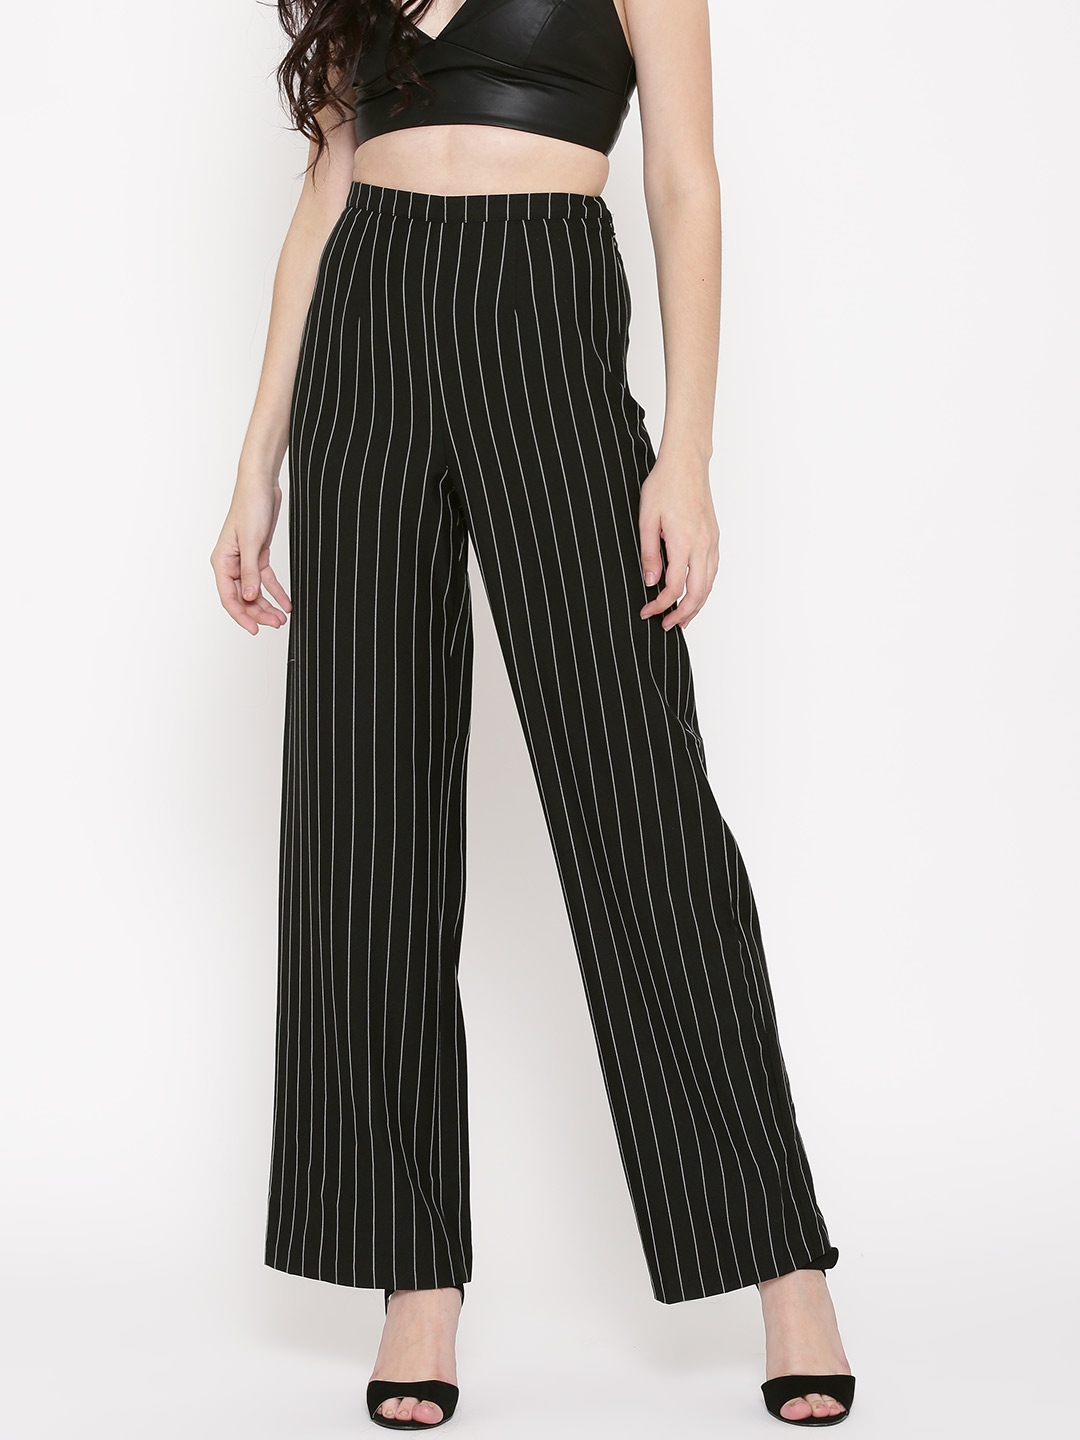 Discover 126+ striped palazzo pants super hot